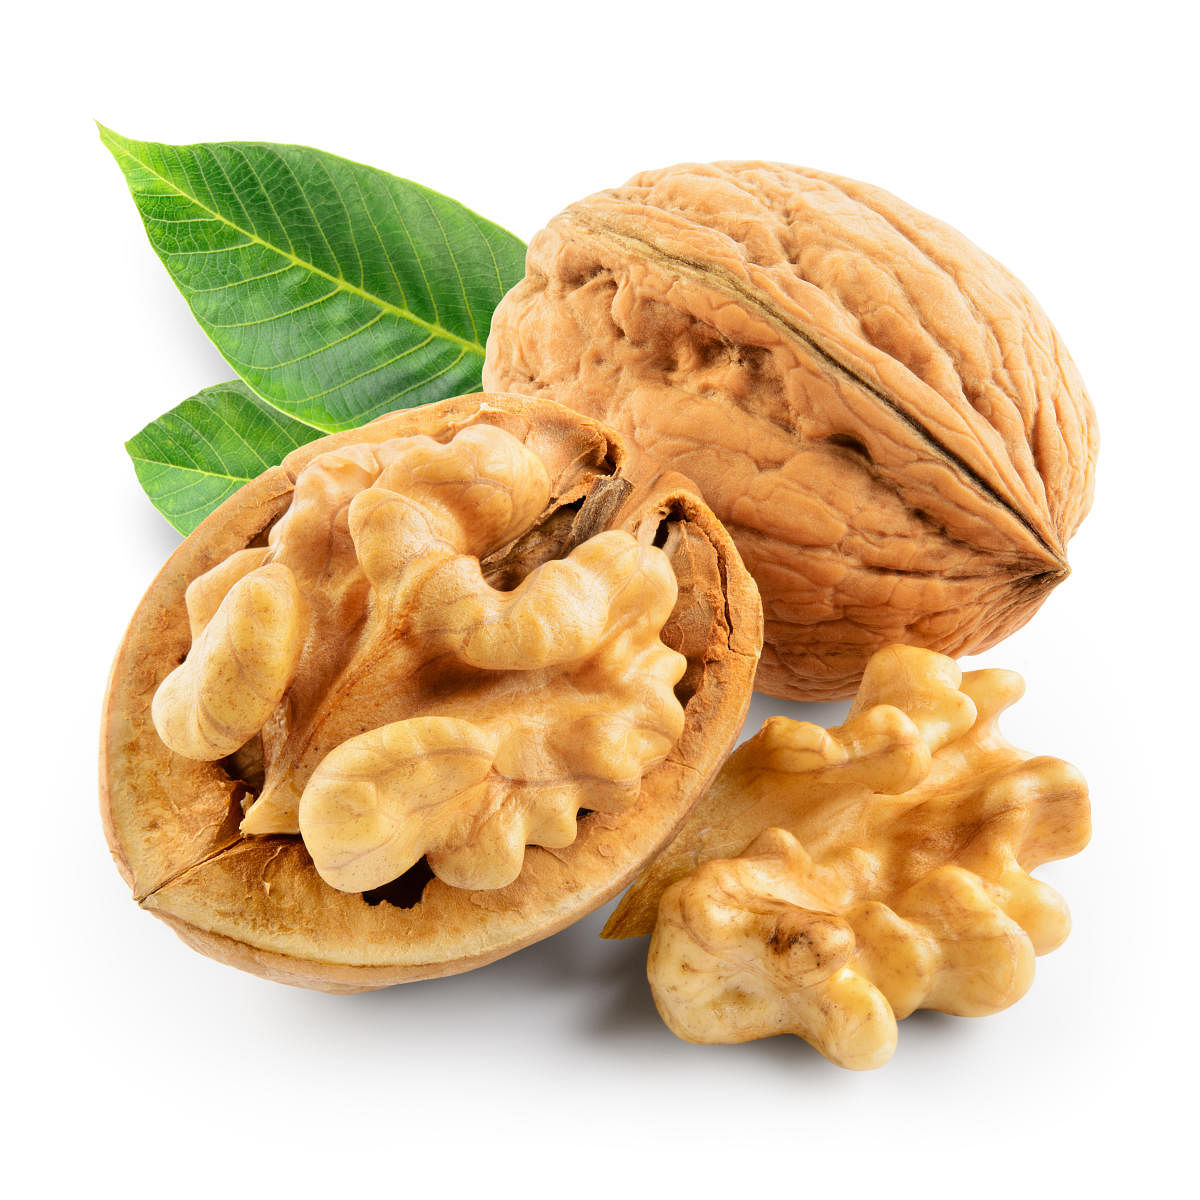 Eating walnuts daily may lower heart disease risk